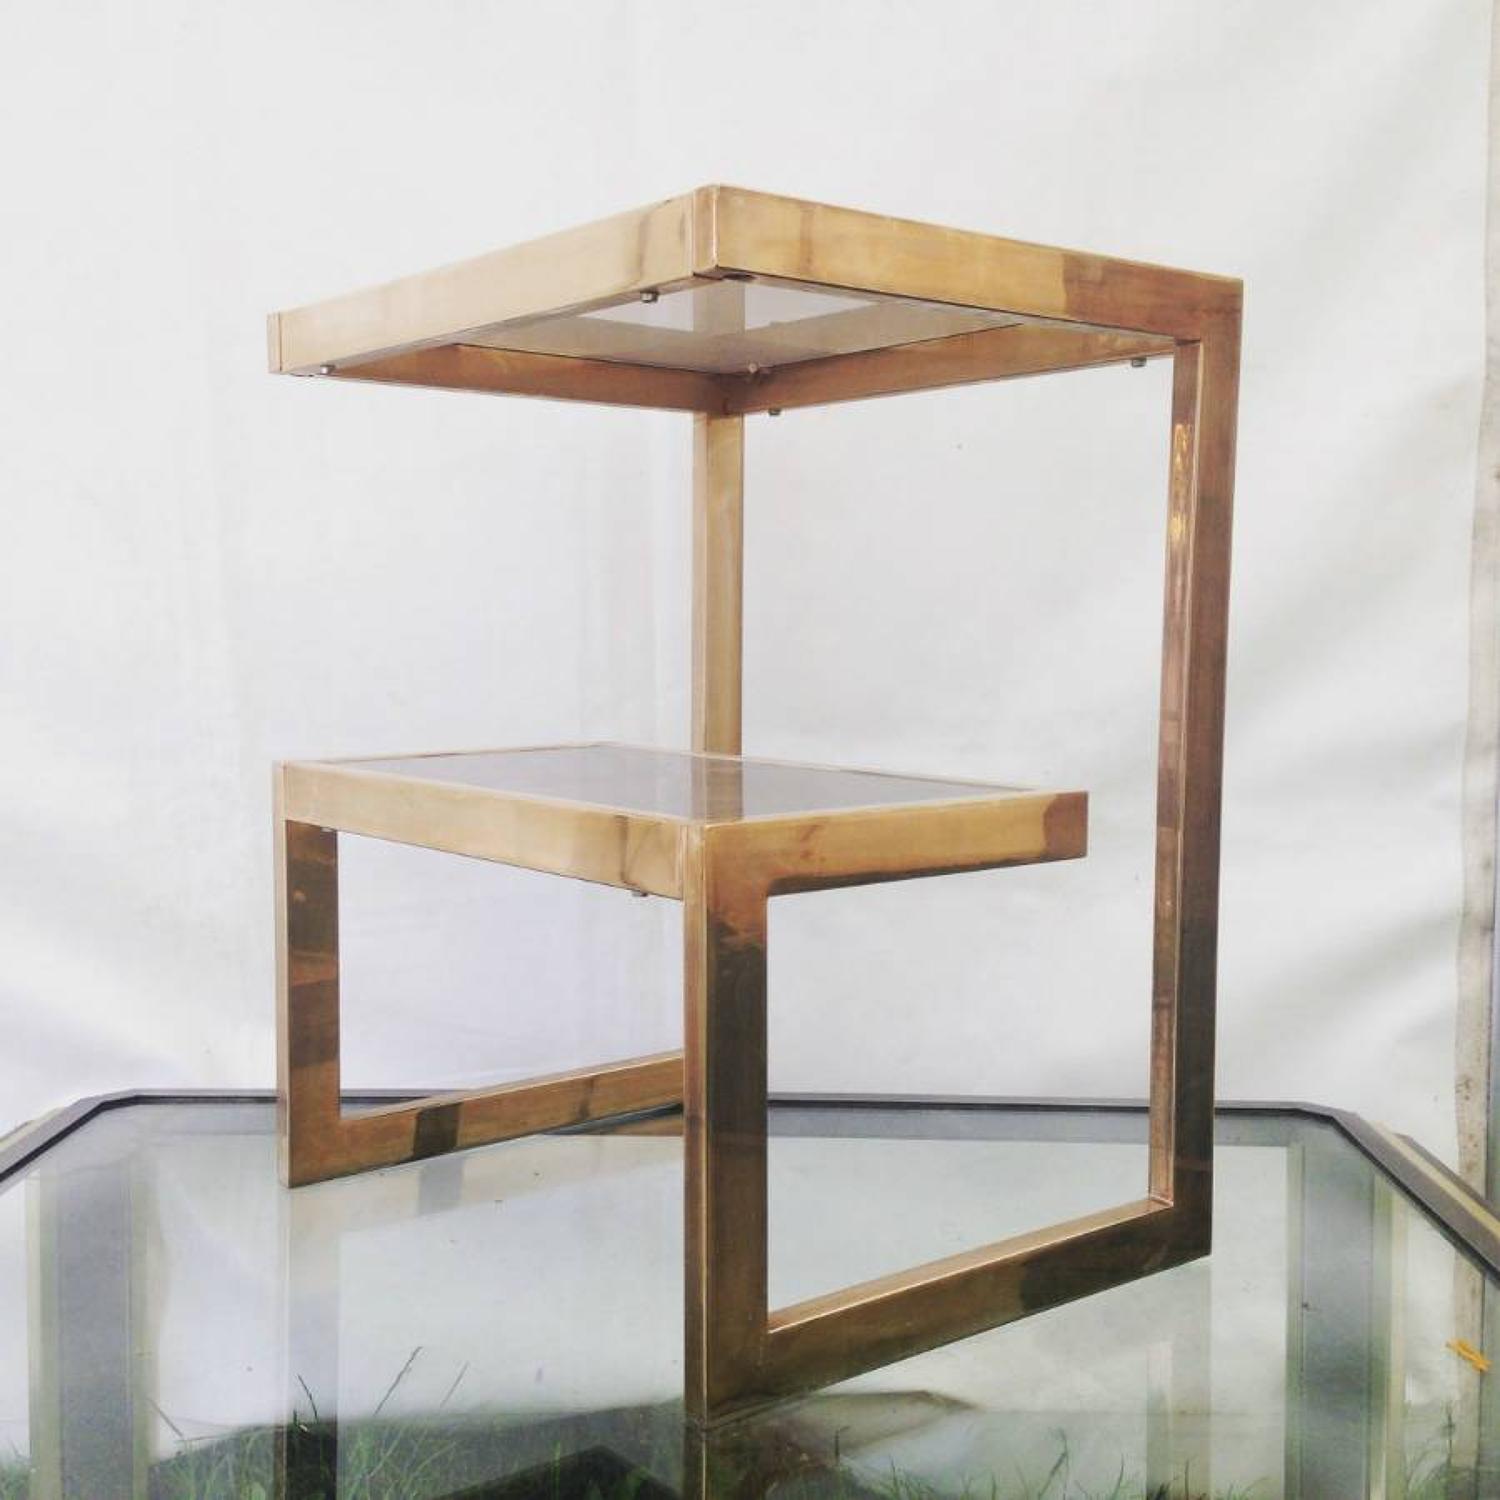 A pair of gold plated G side tables